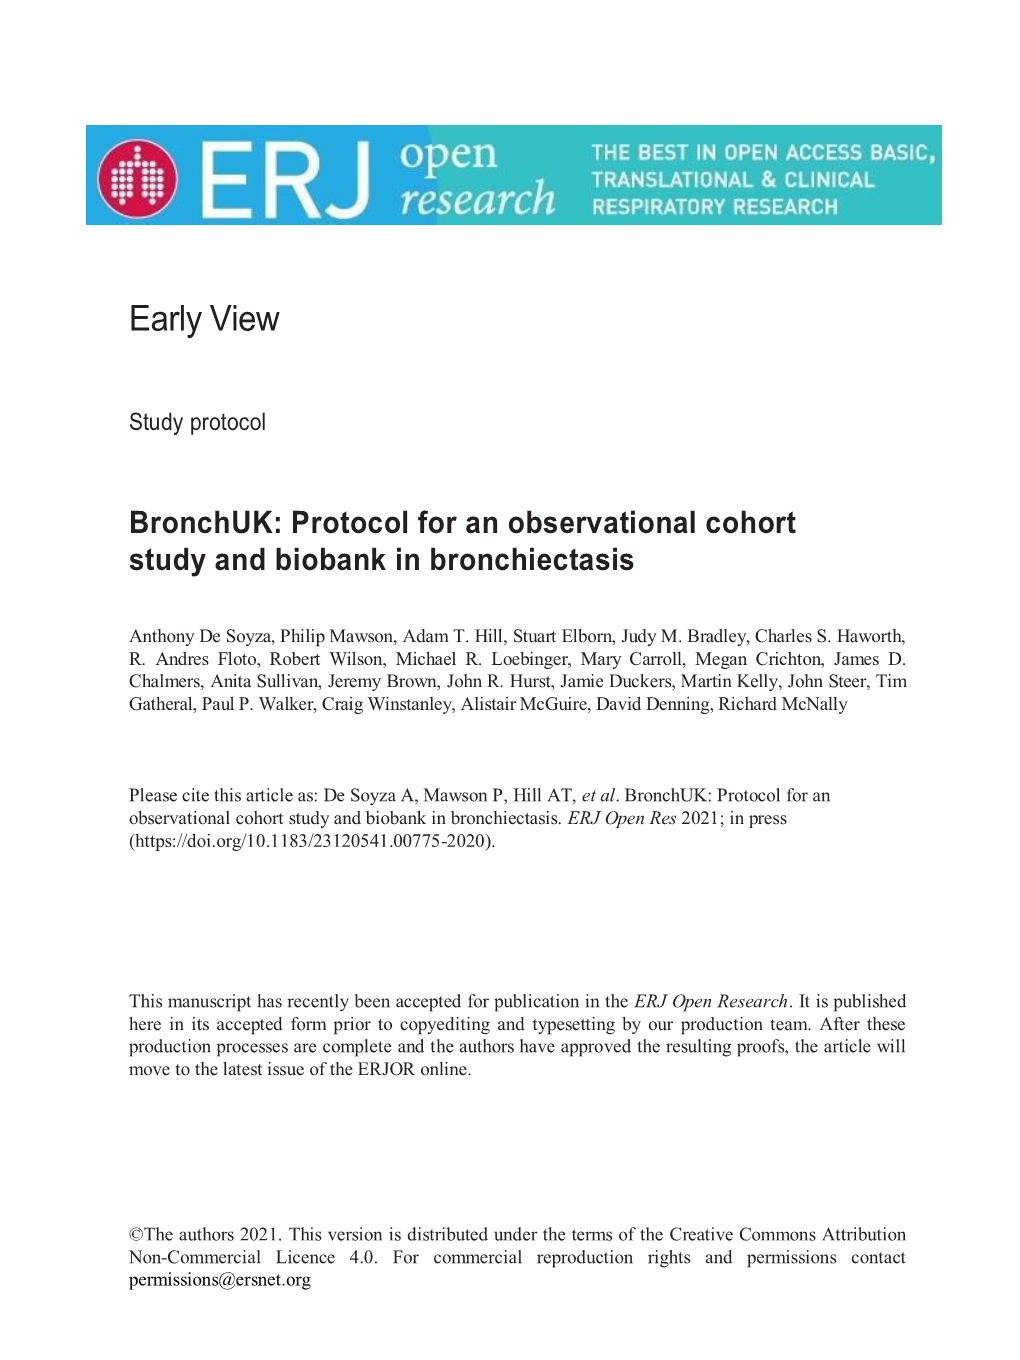 Protocol for an Observational Cohort Study and Biobank in Bronchiectasis